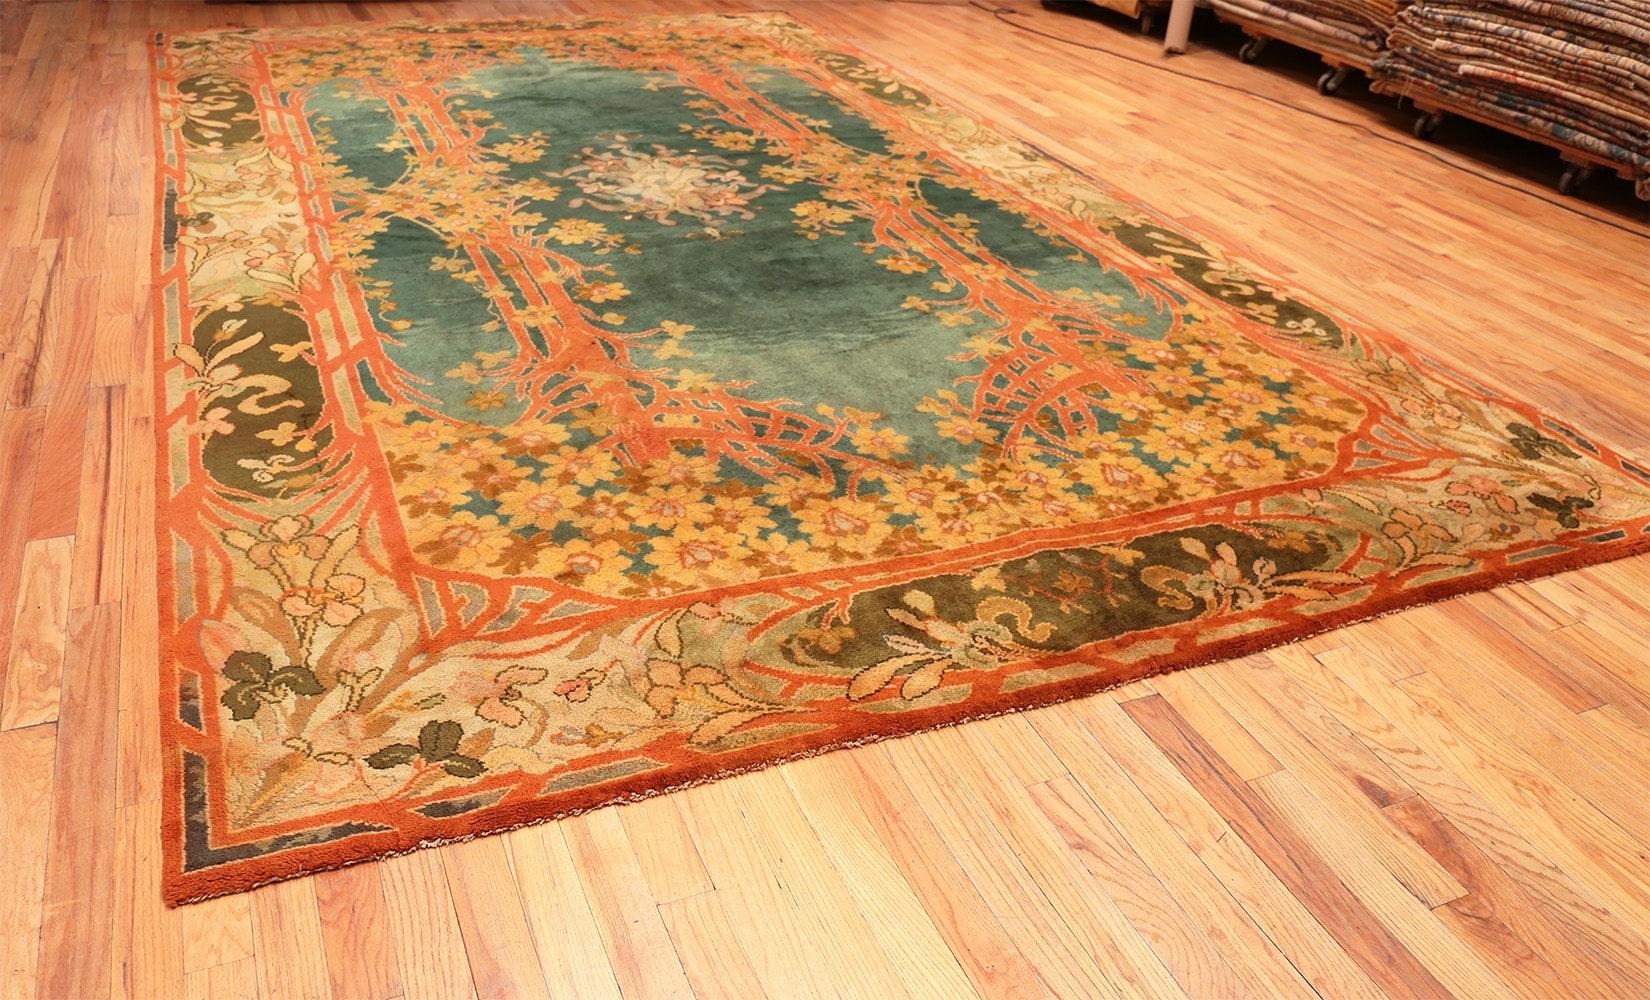 Northern Irish Nazmiyal Antique Art Nouveau Donegal Rug. 10 ft 2 in x 17 ft (3.1 m x 5.18 m)